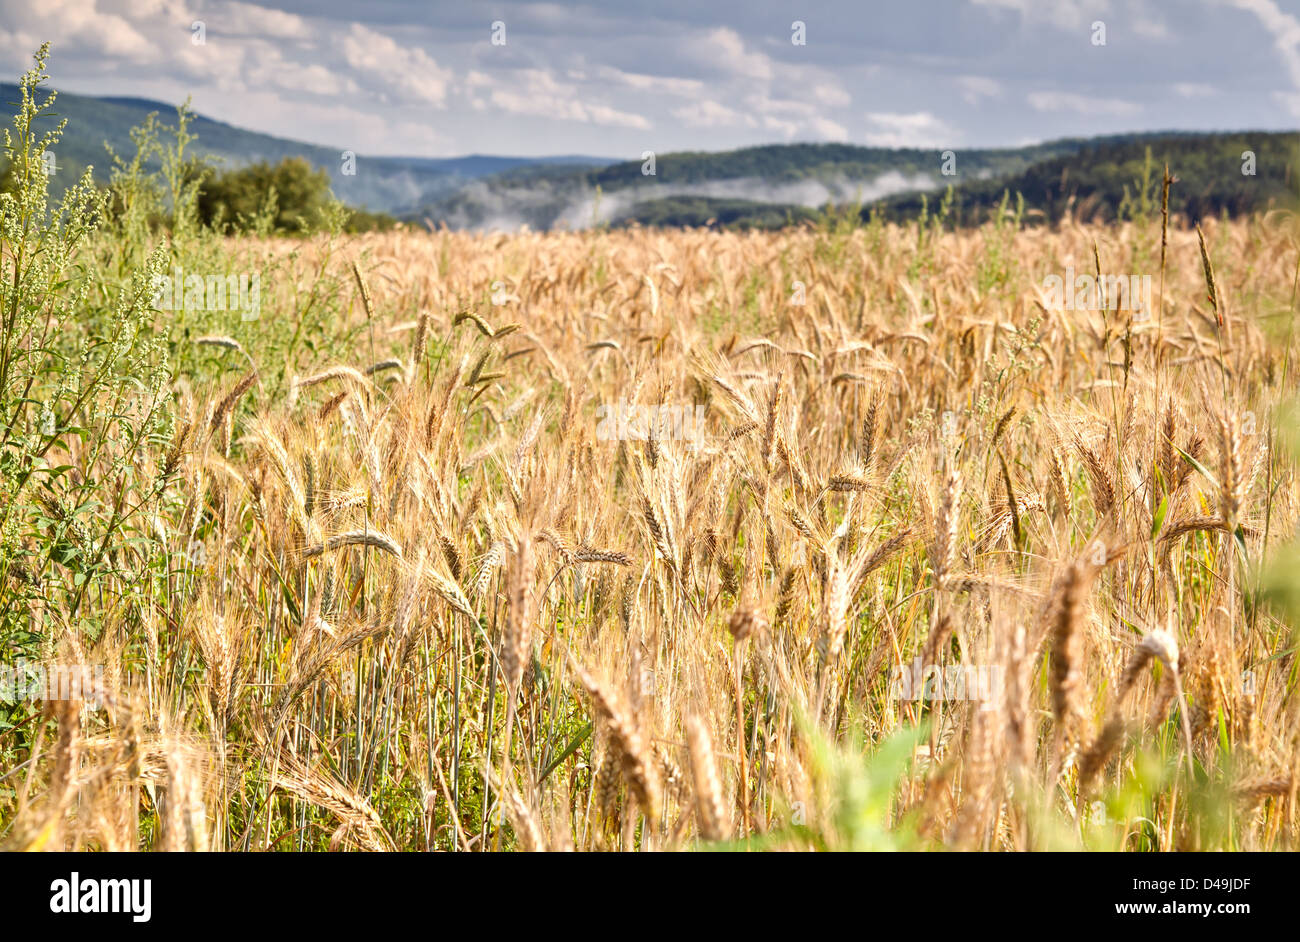 wheat field in mountains during summer, Germany Stock Photo